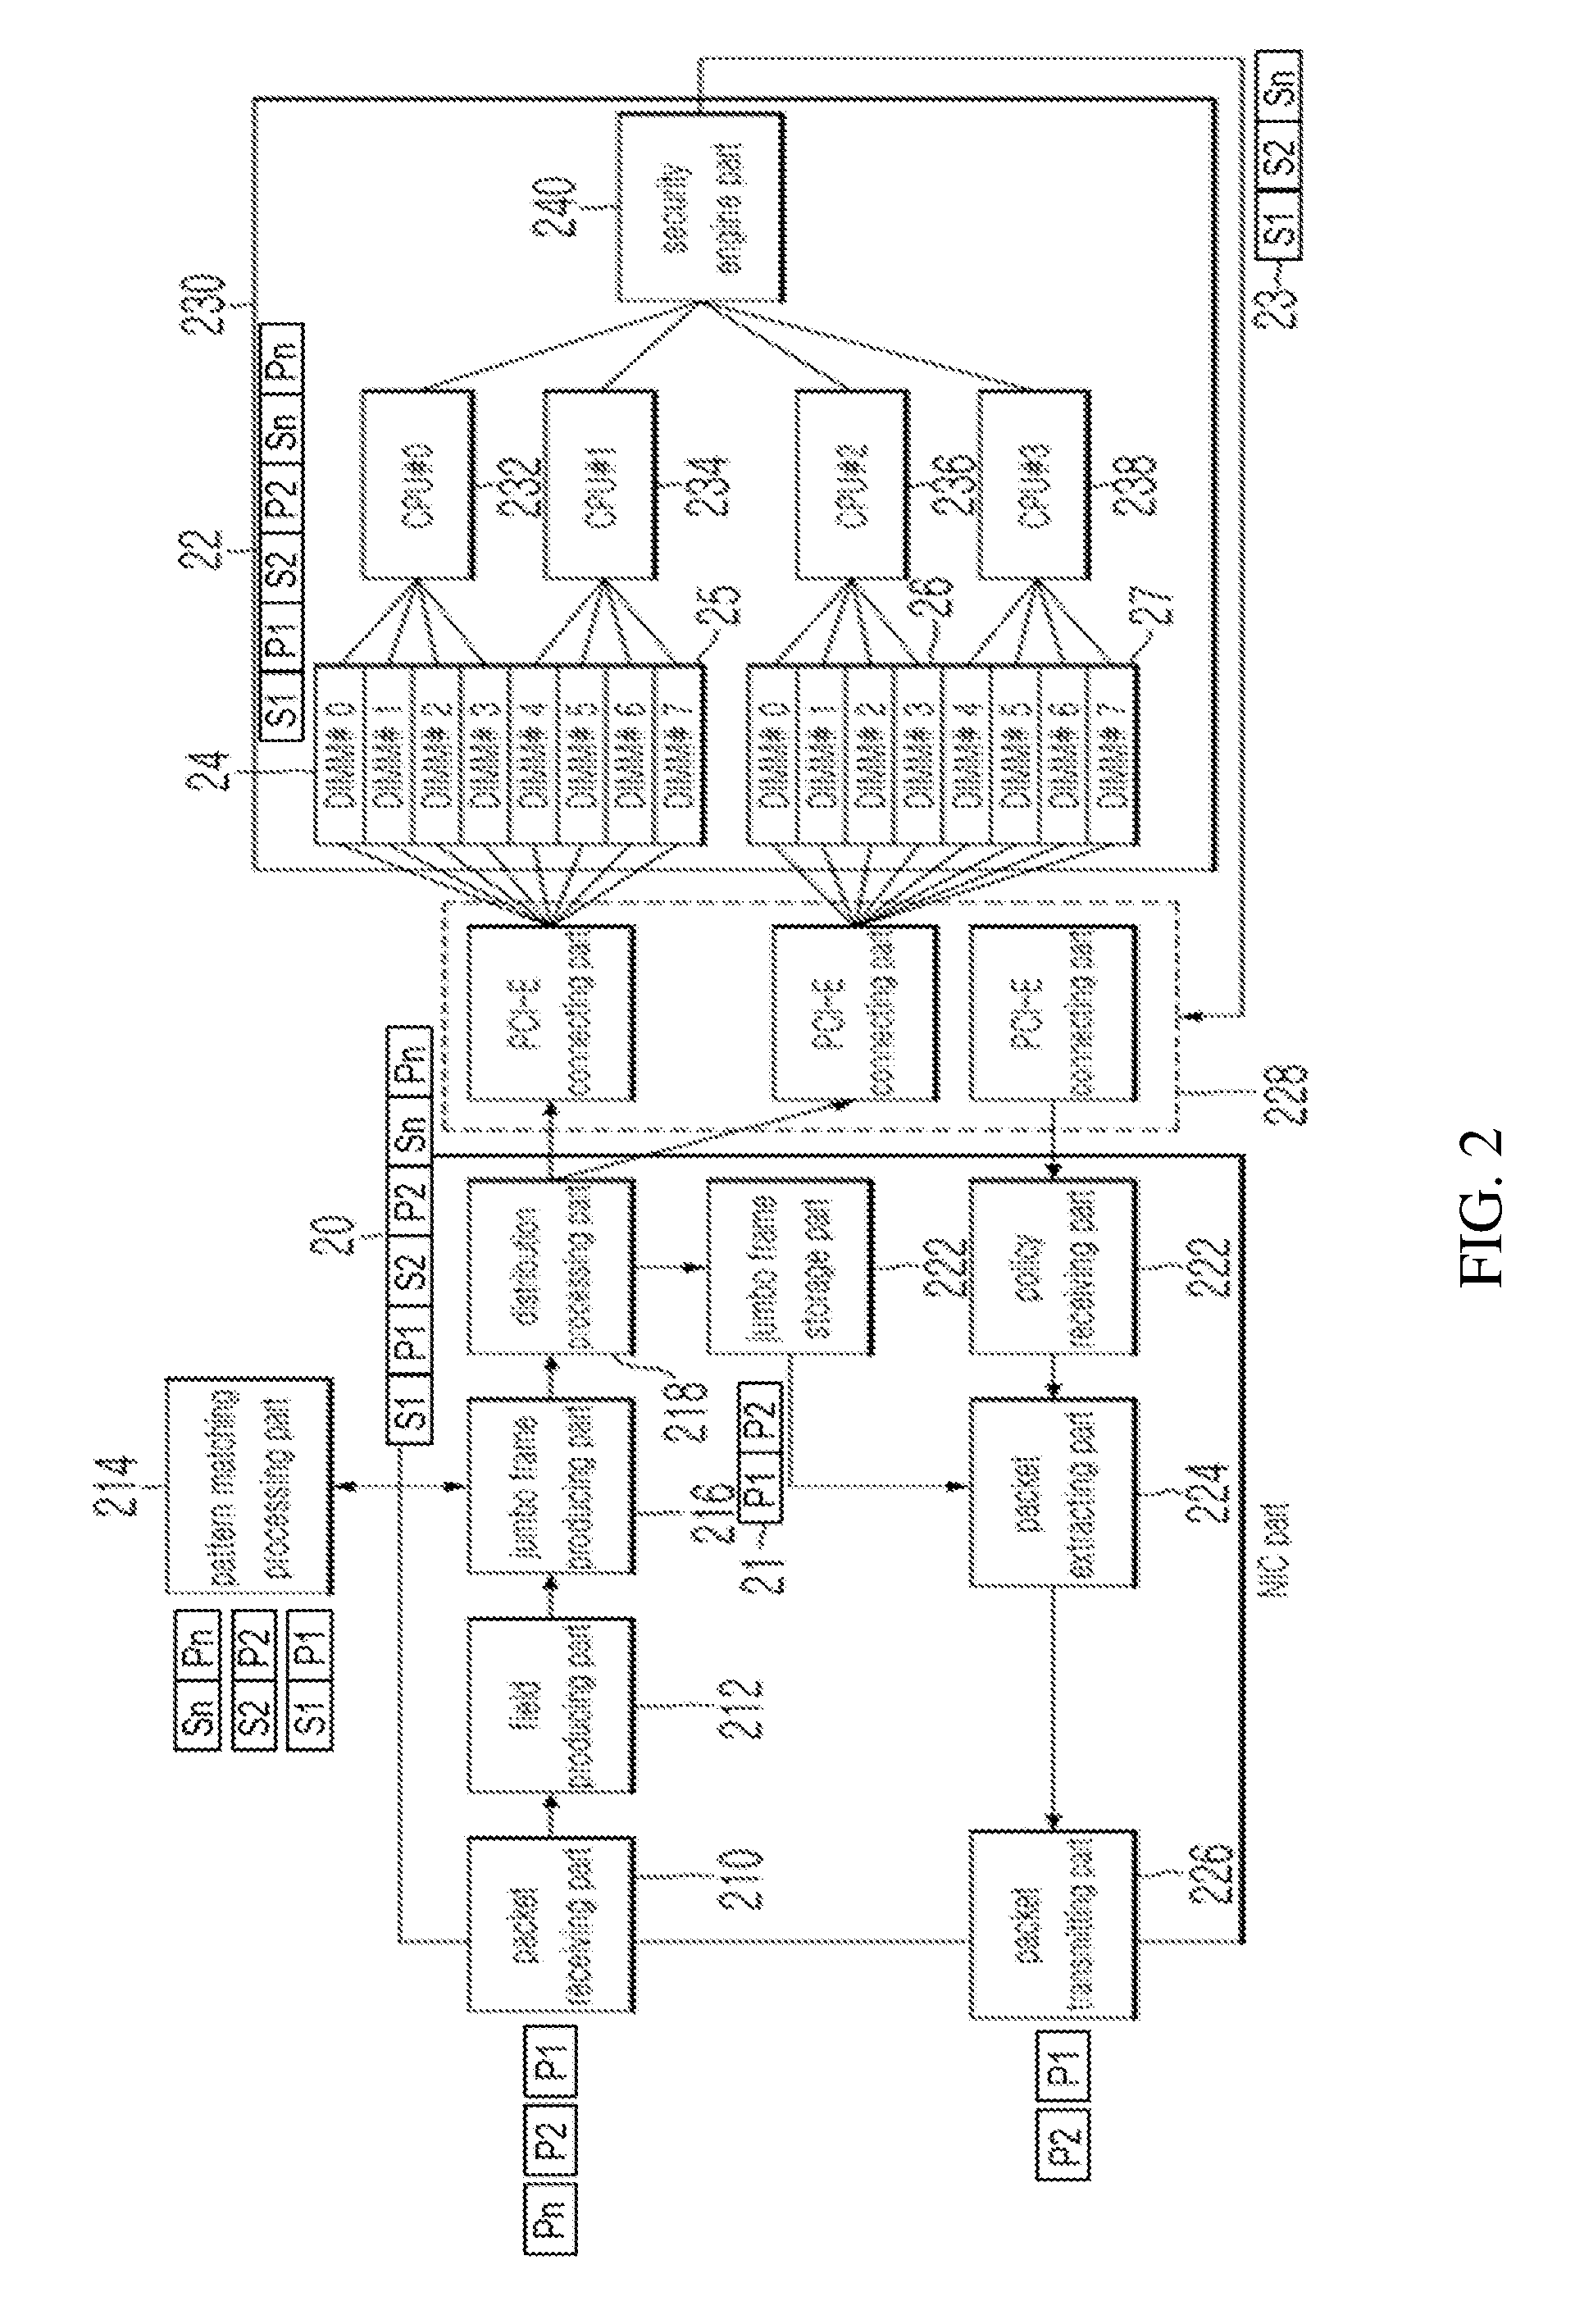 Method and apparatus for service traffic security using DIMM channel distribution in multicore processing system